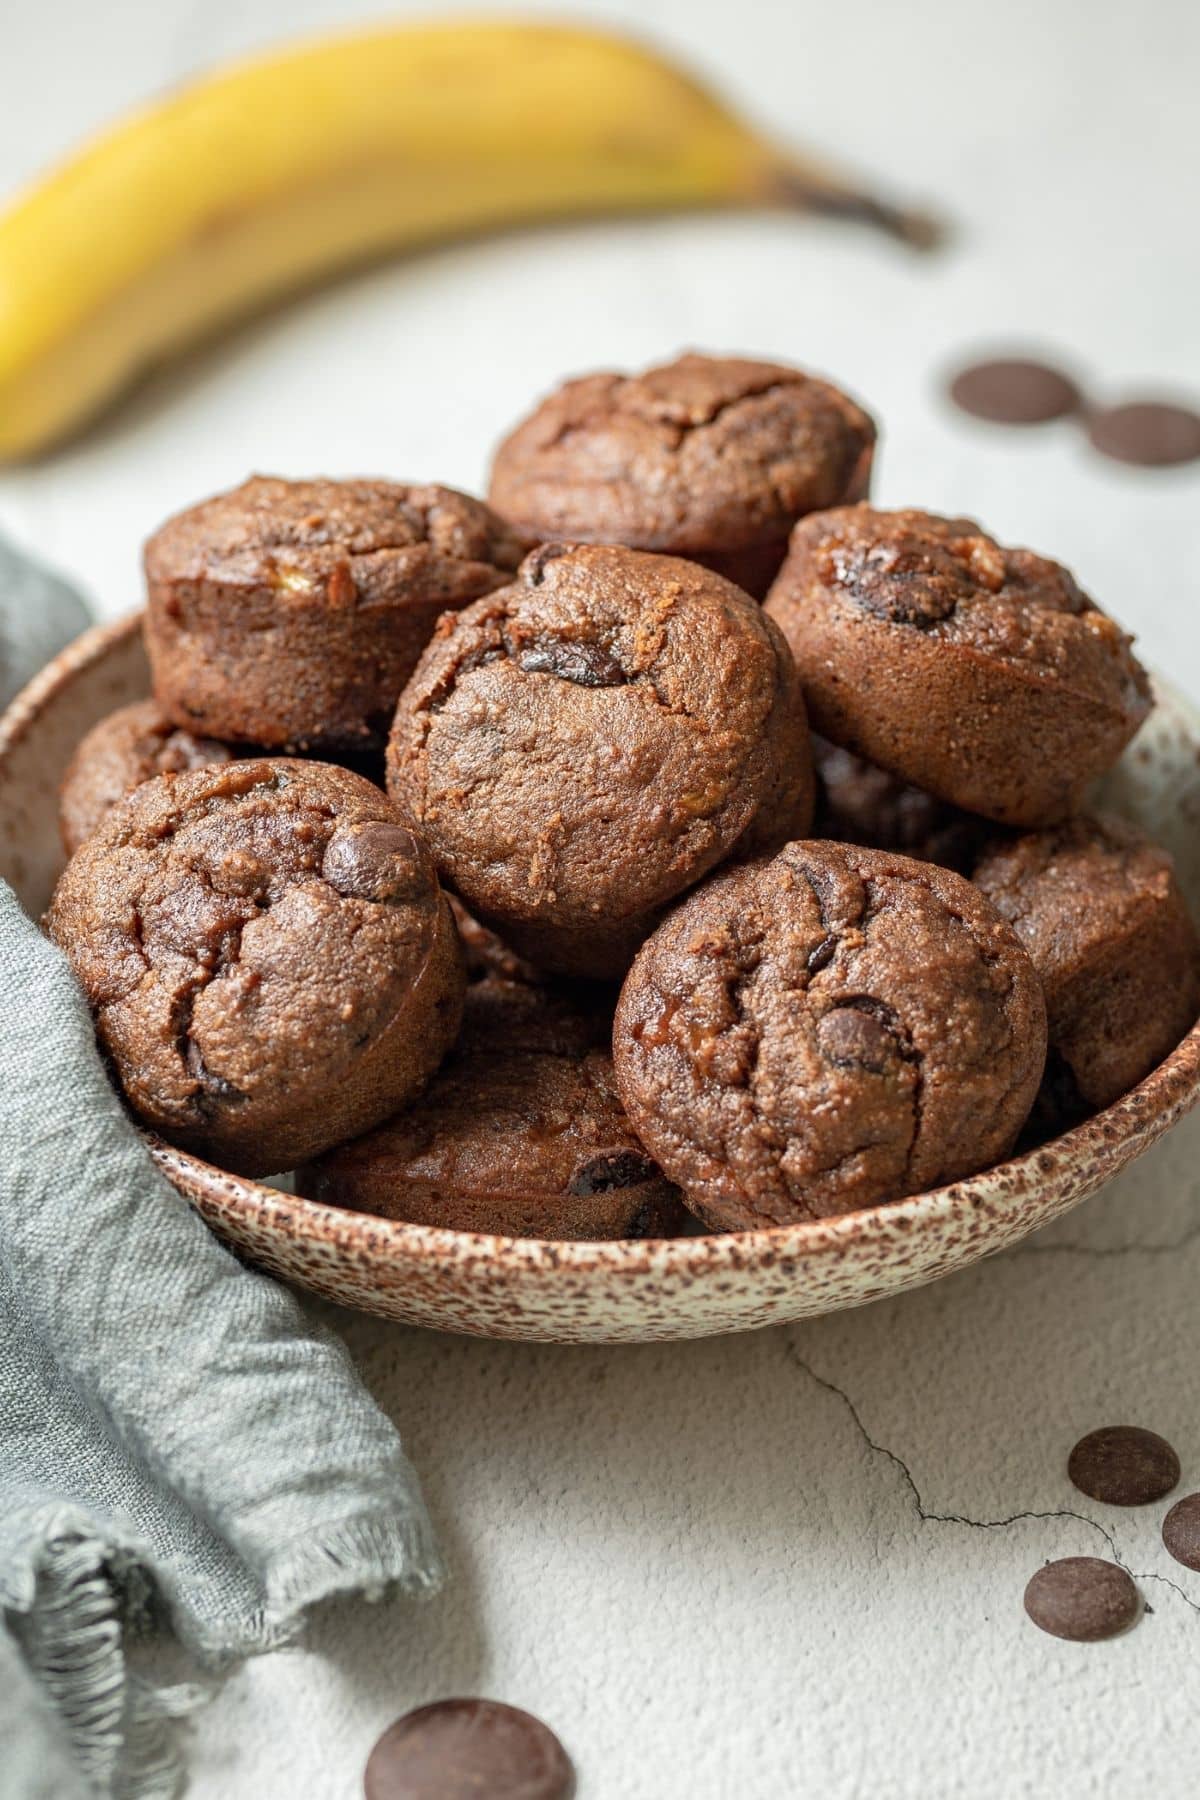 Bowl of Gluten Free Banana Muffins with Chocolate Chips.